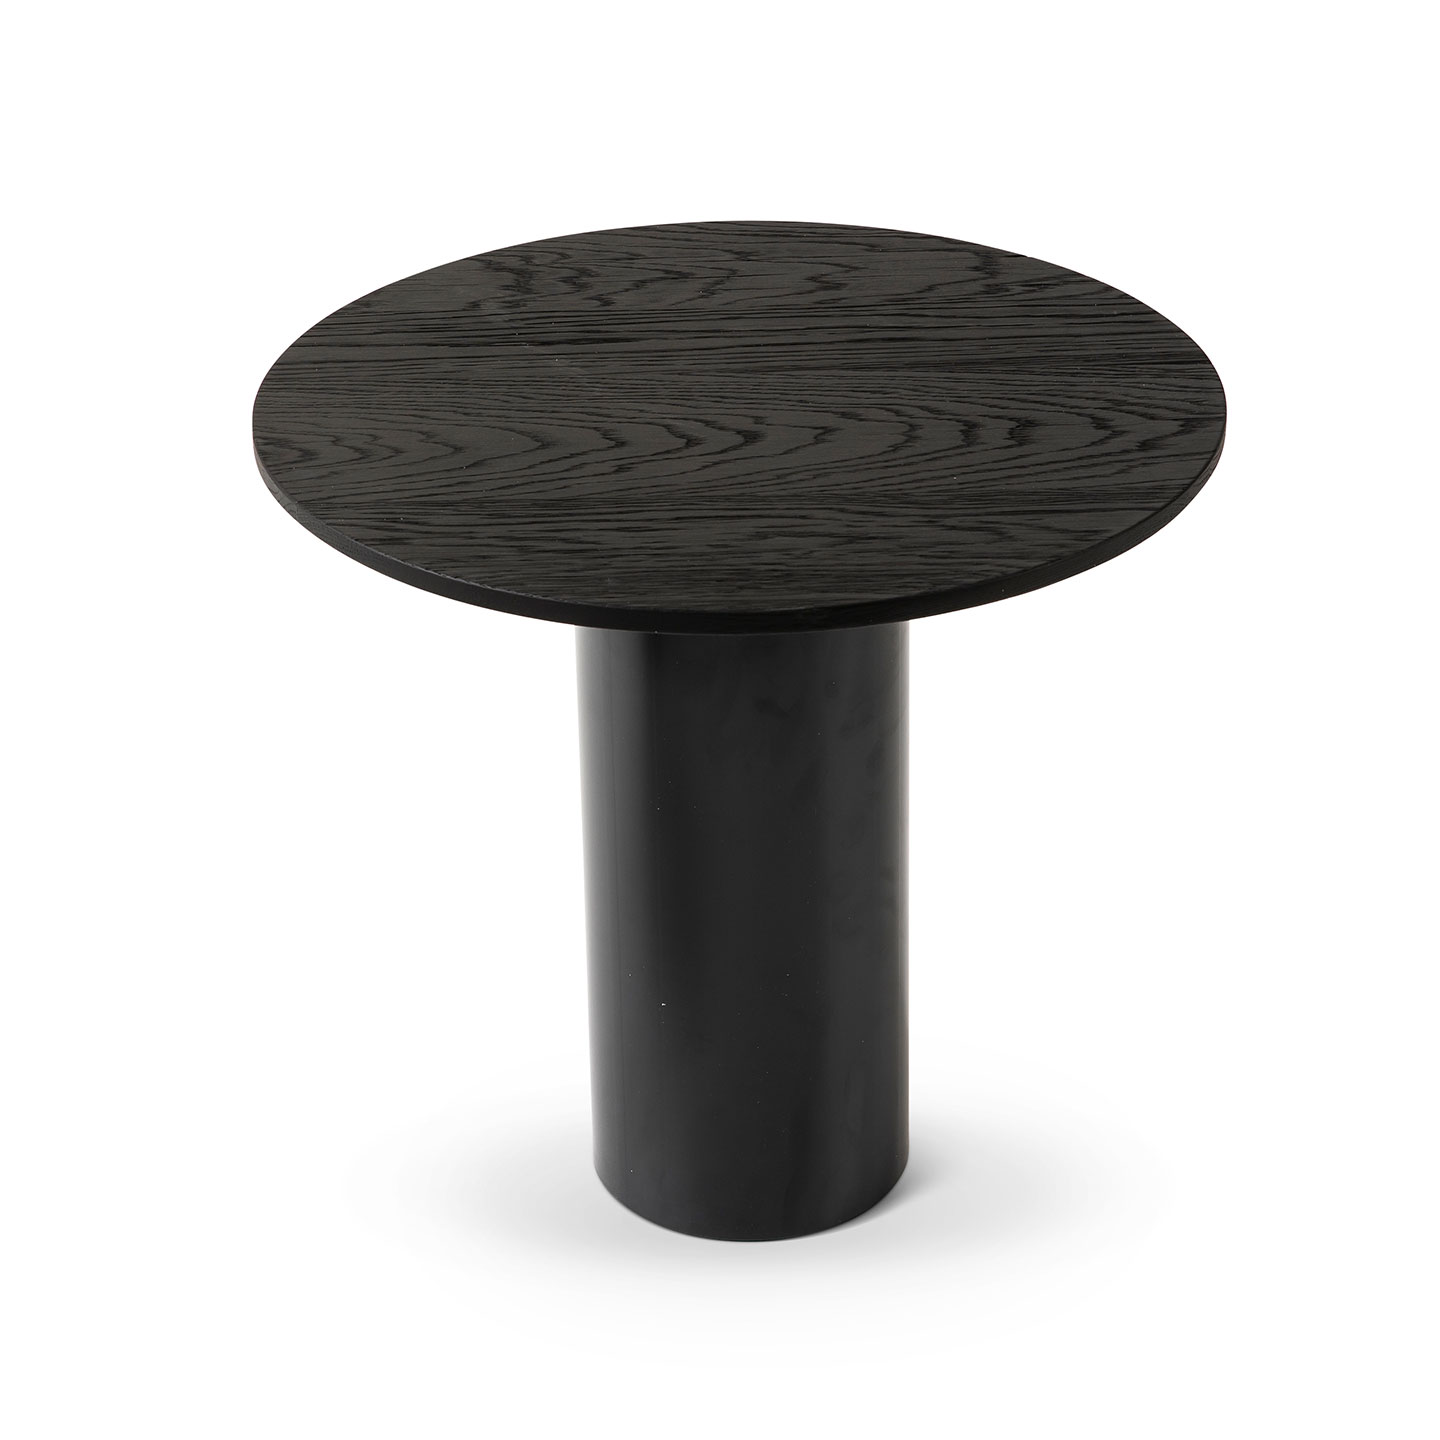 Haworth Mush Table with Carbon Stained Oak circular top and black base